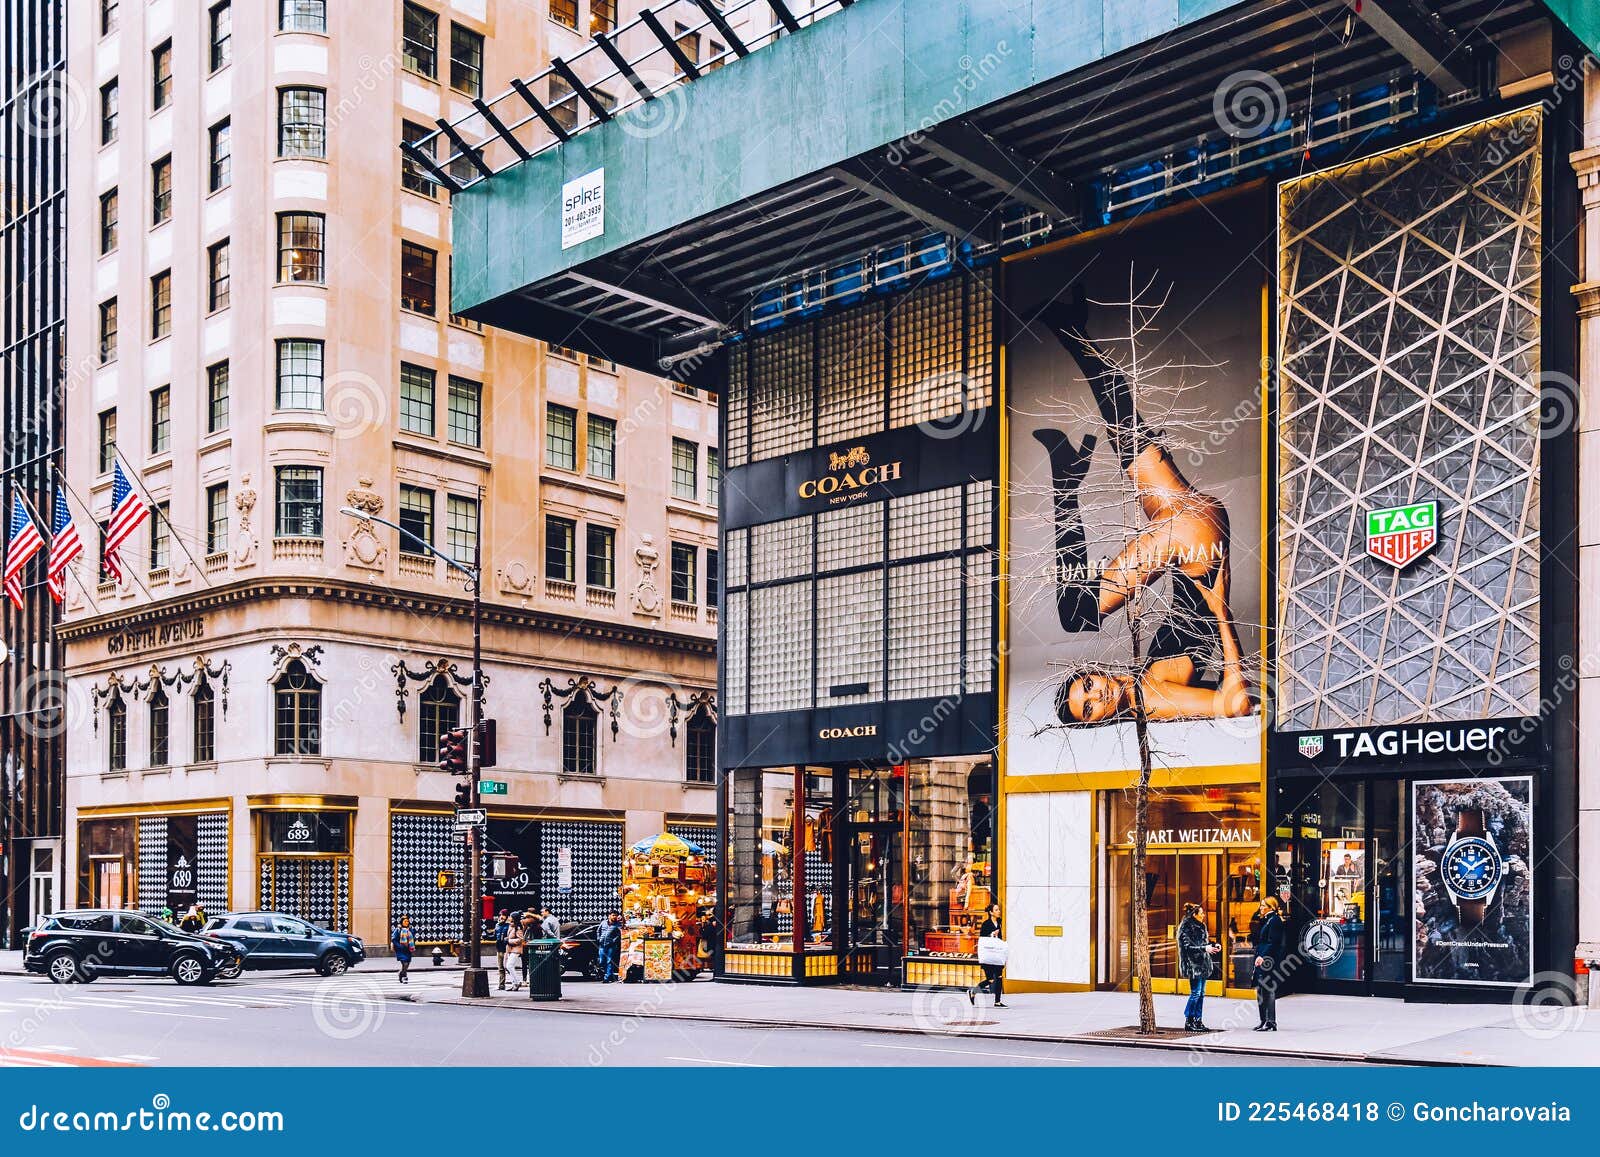 Iconic Stores of Fifth Avenue